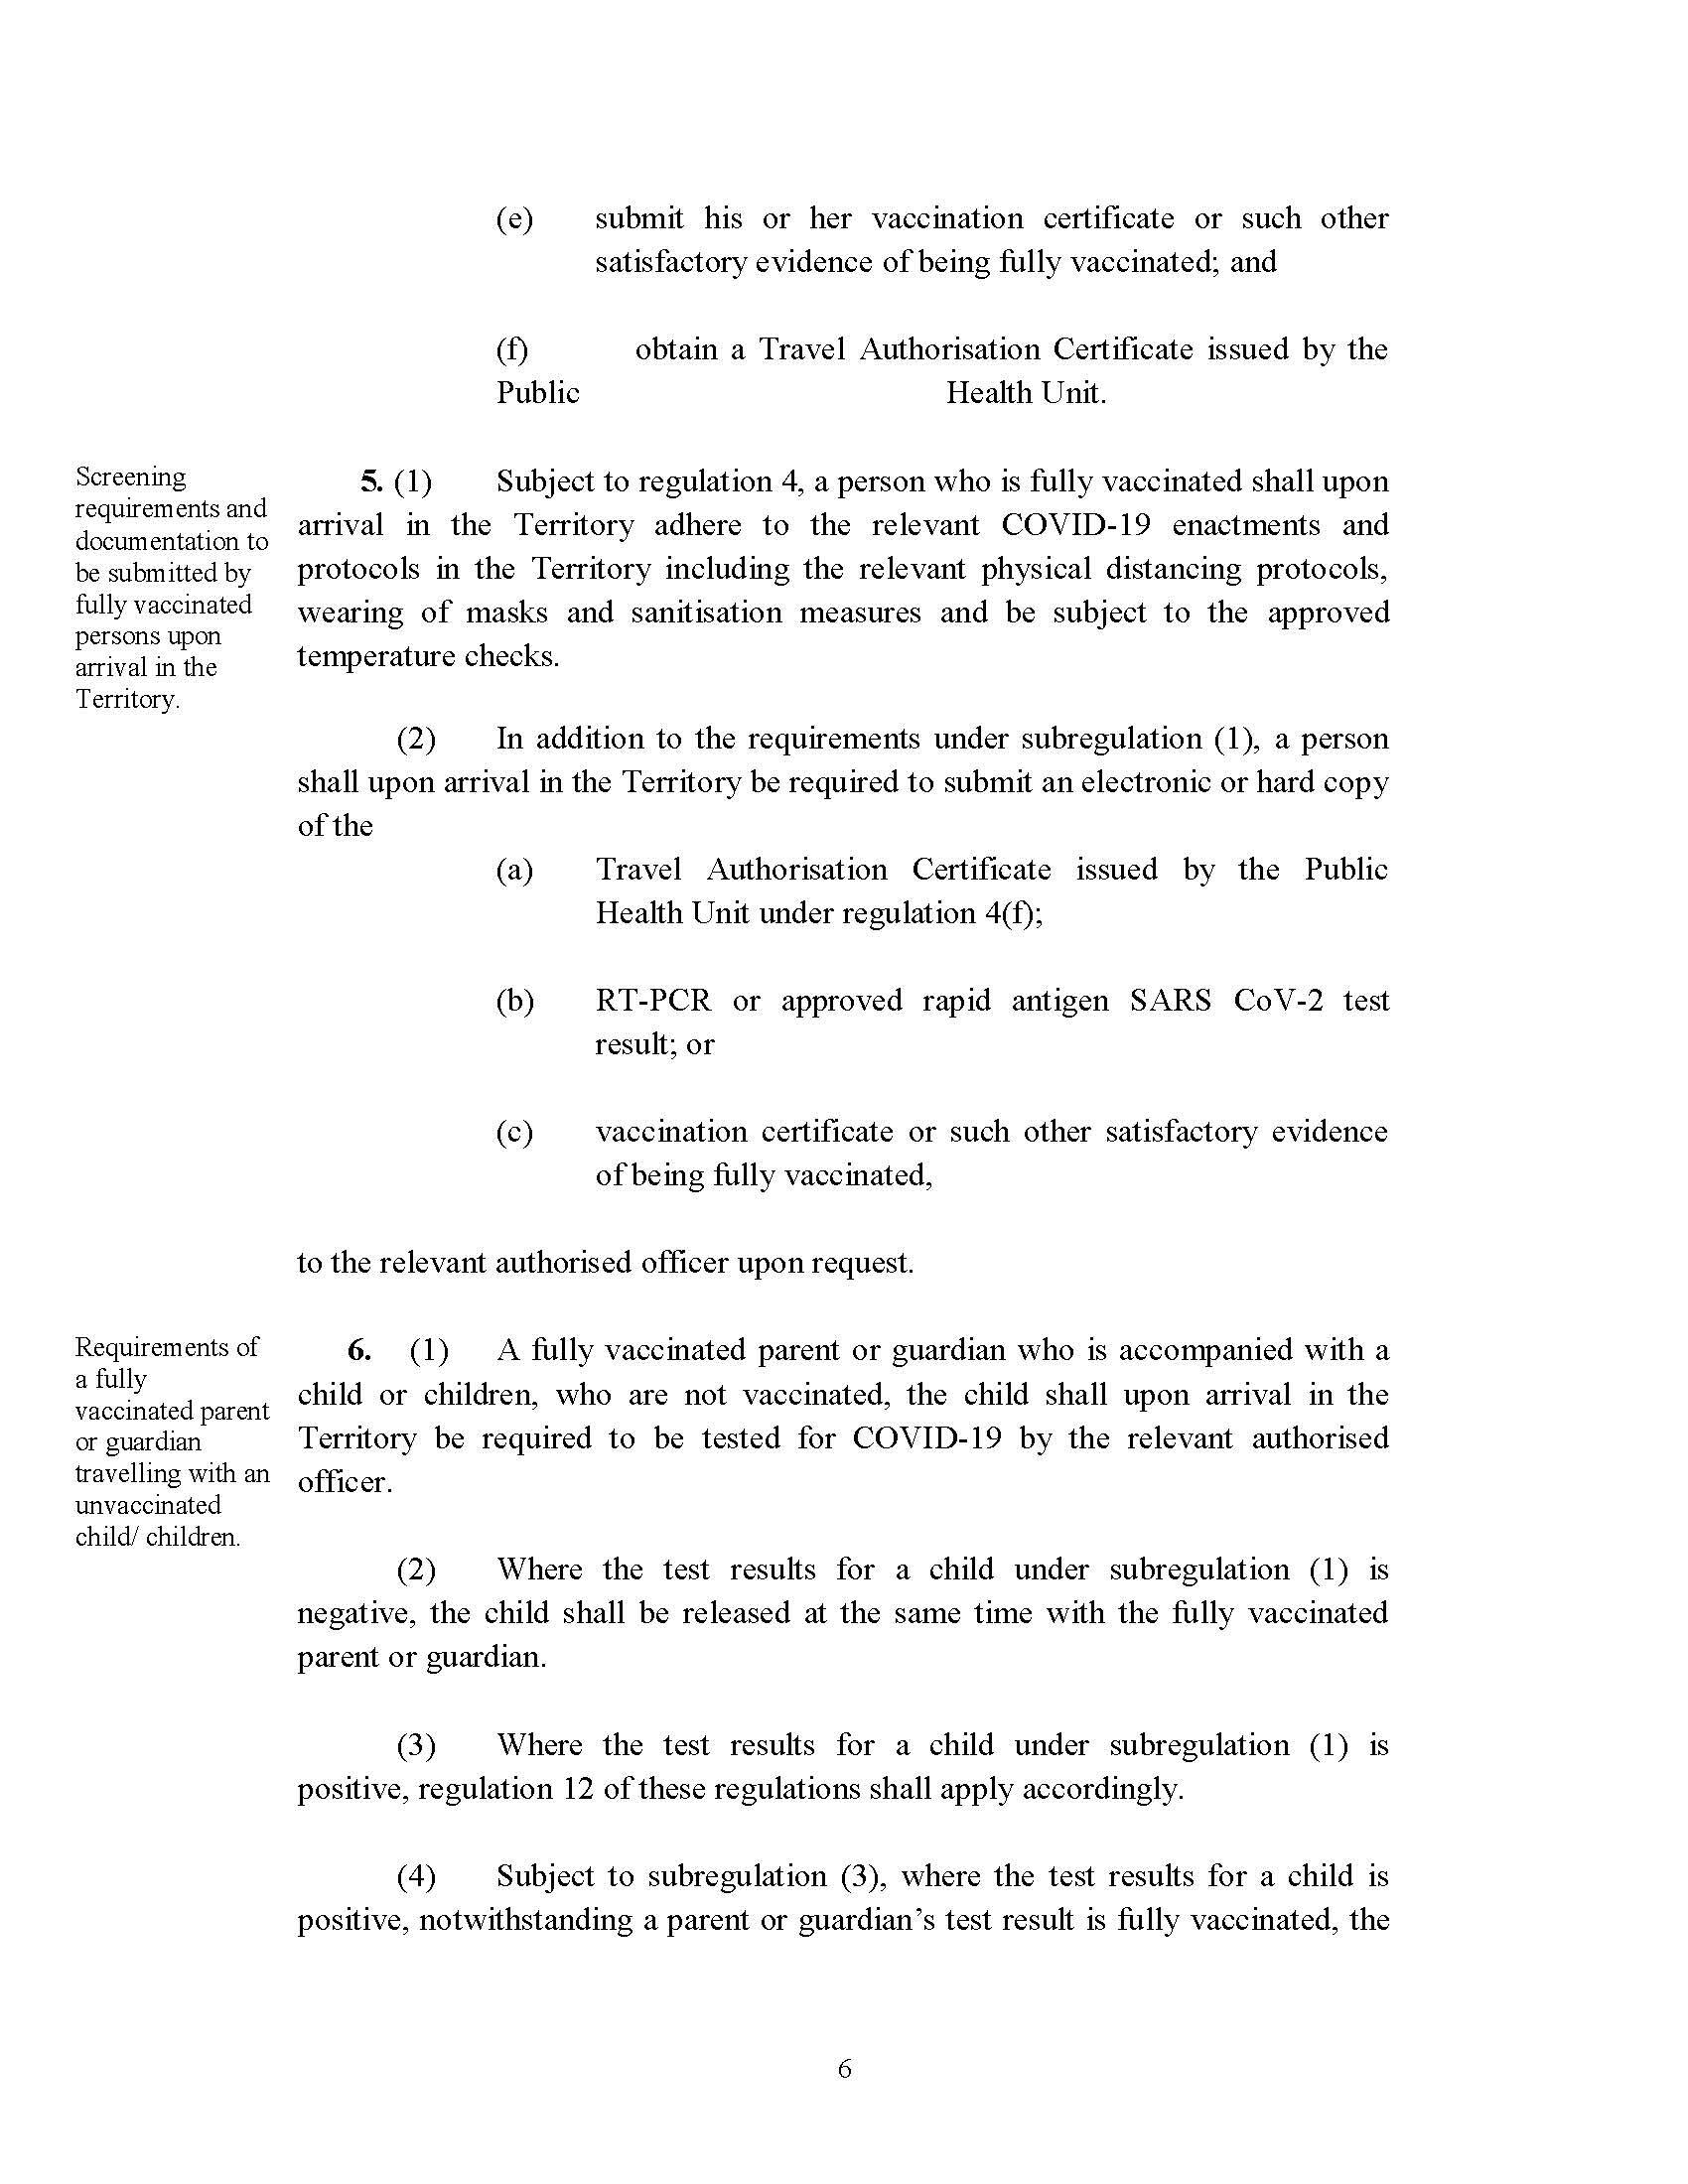 Attached picture SI No 55 of 2021 -- COVID-19 Control and Suppression (Entry of Persons) (No. 3) Regulations, 2021_Page_06.jpg